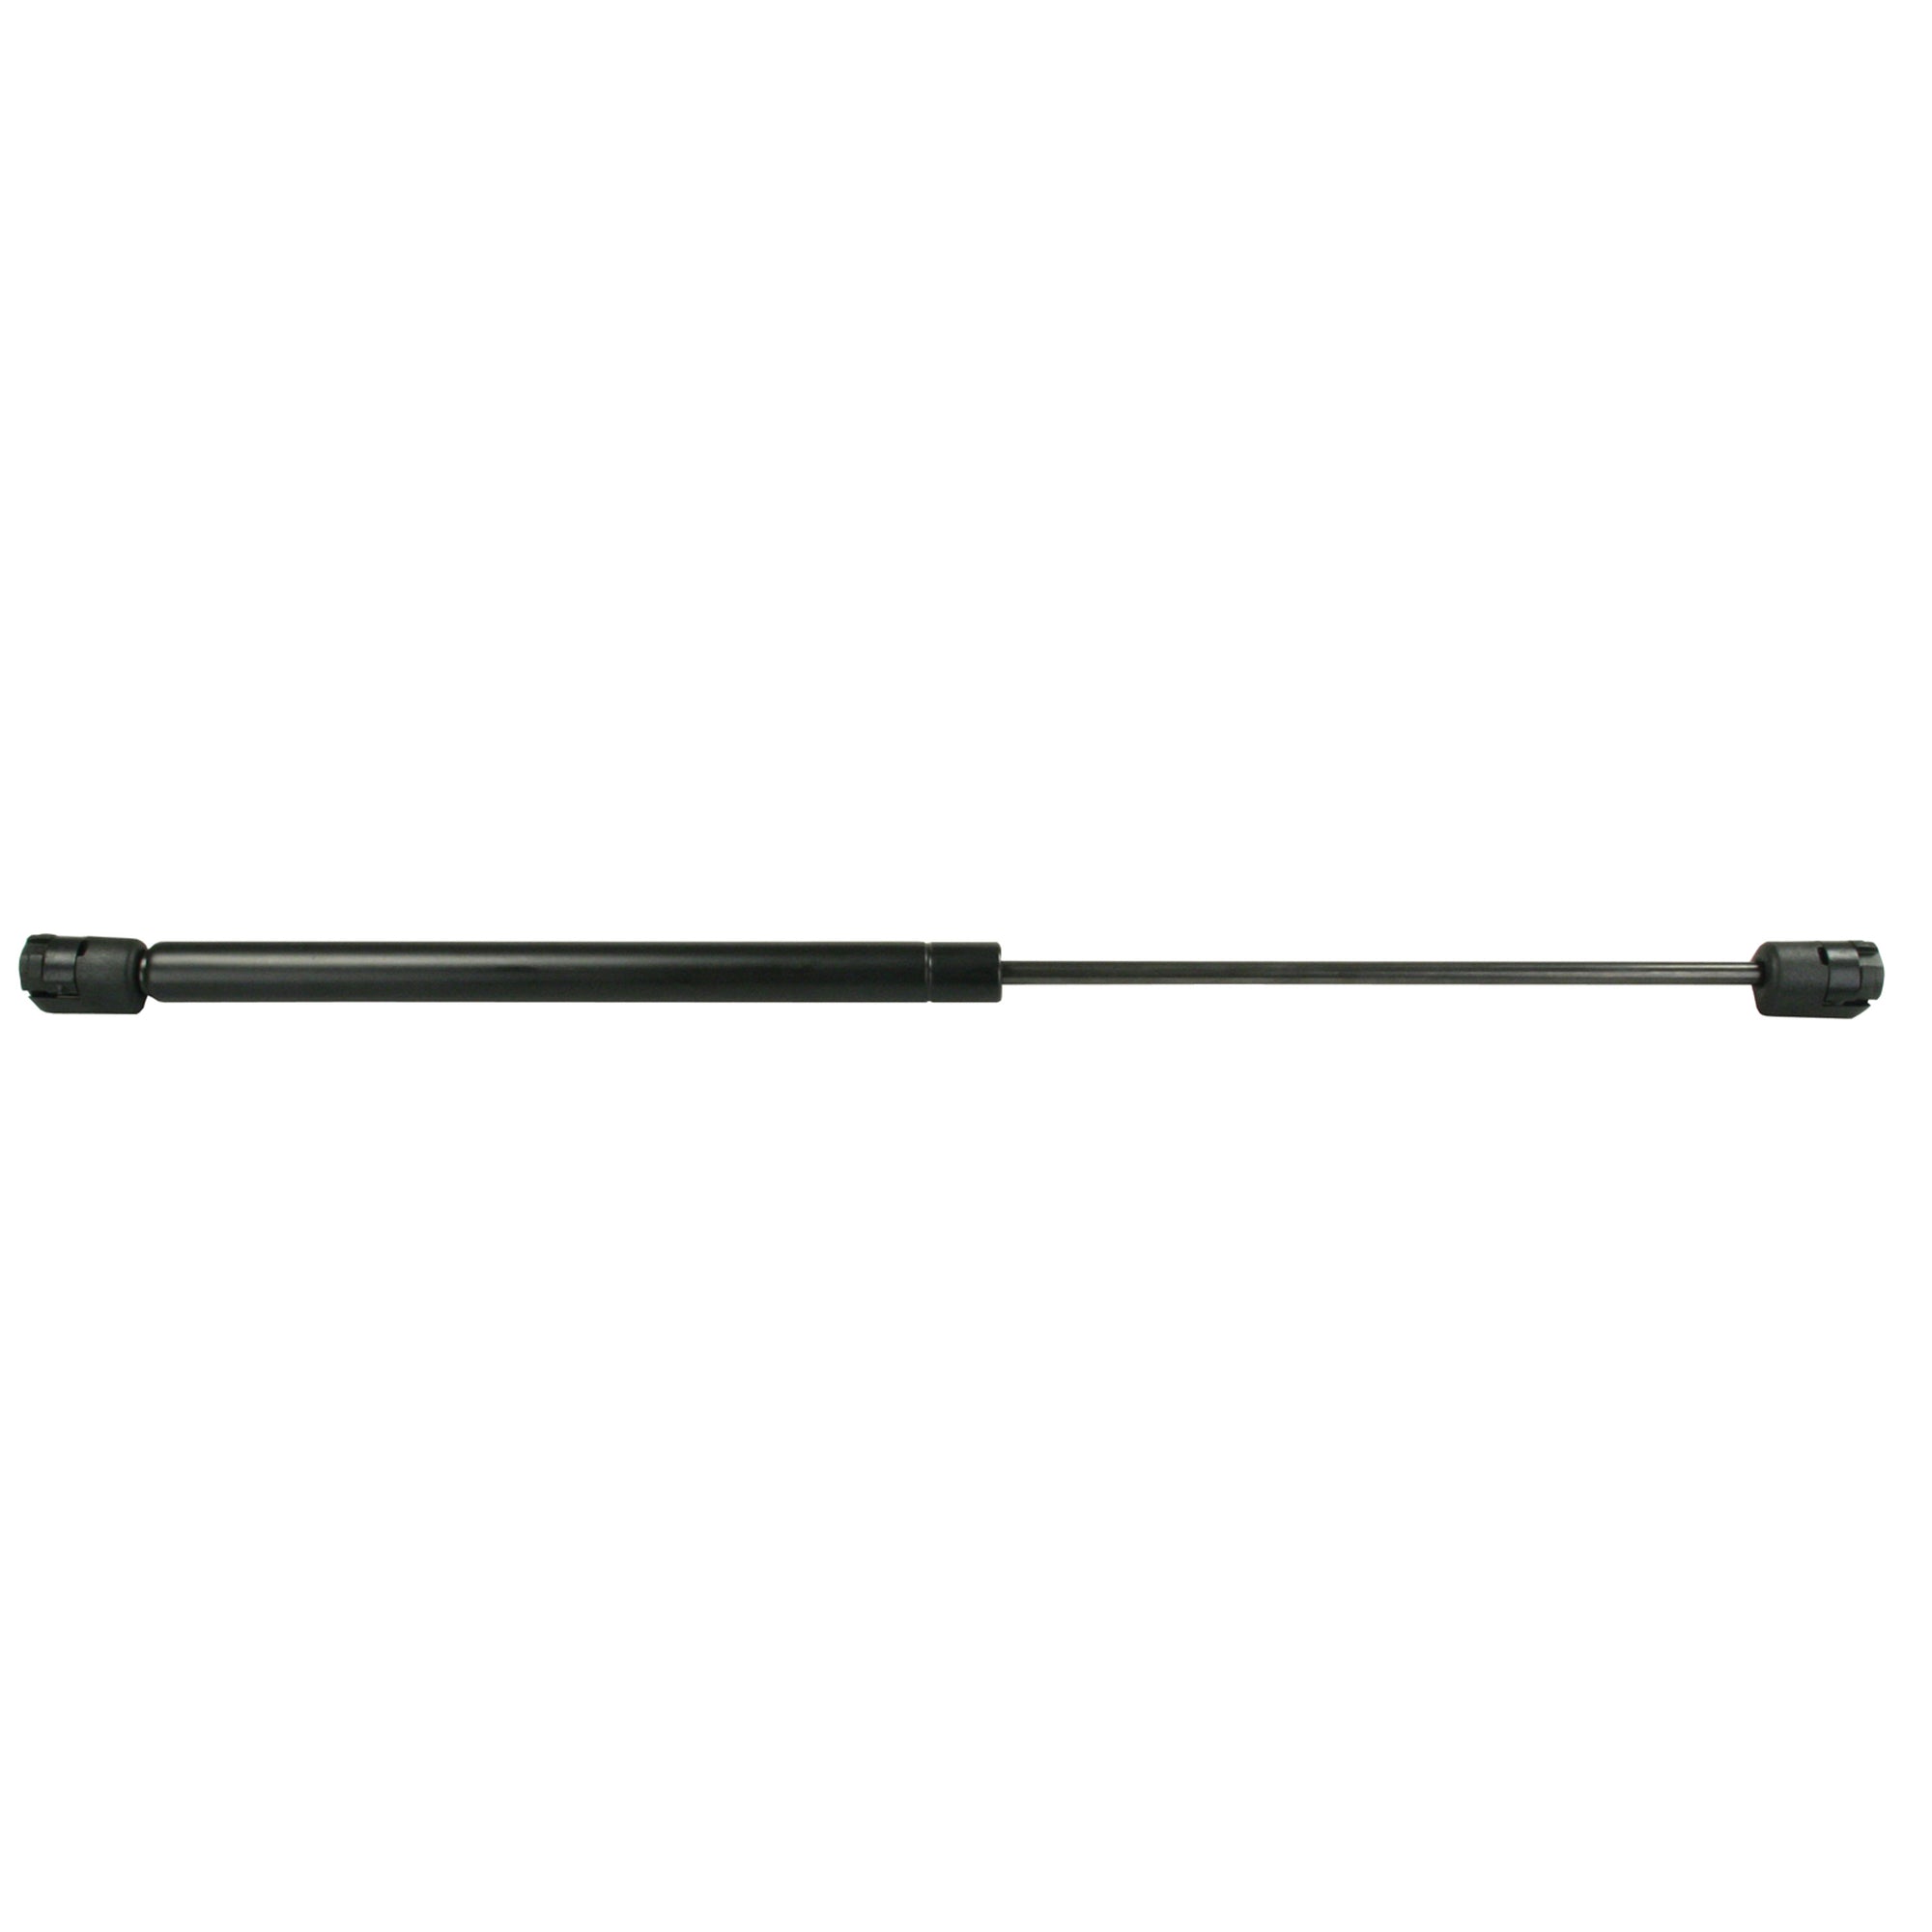 JR Products GSNI-4033-30 Gas Spring